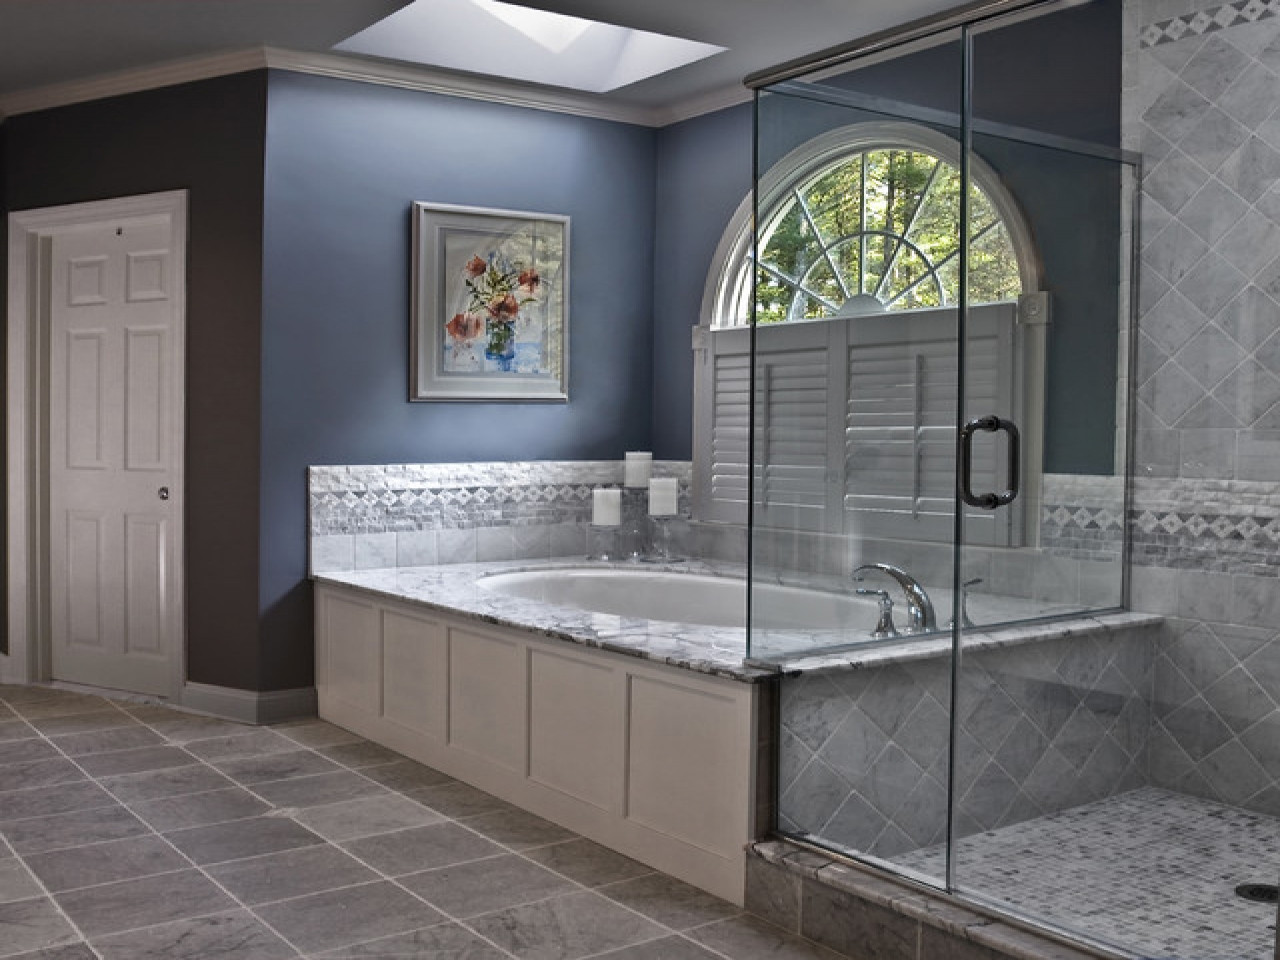 Blue Gray Bathroom Paint
 Cool bathroom colors gray and blue paint ideas blue and